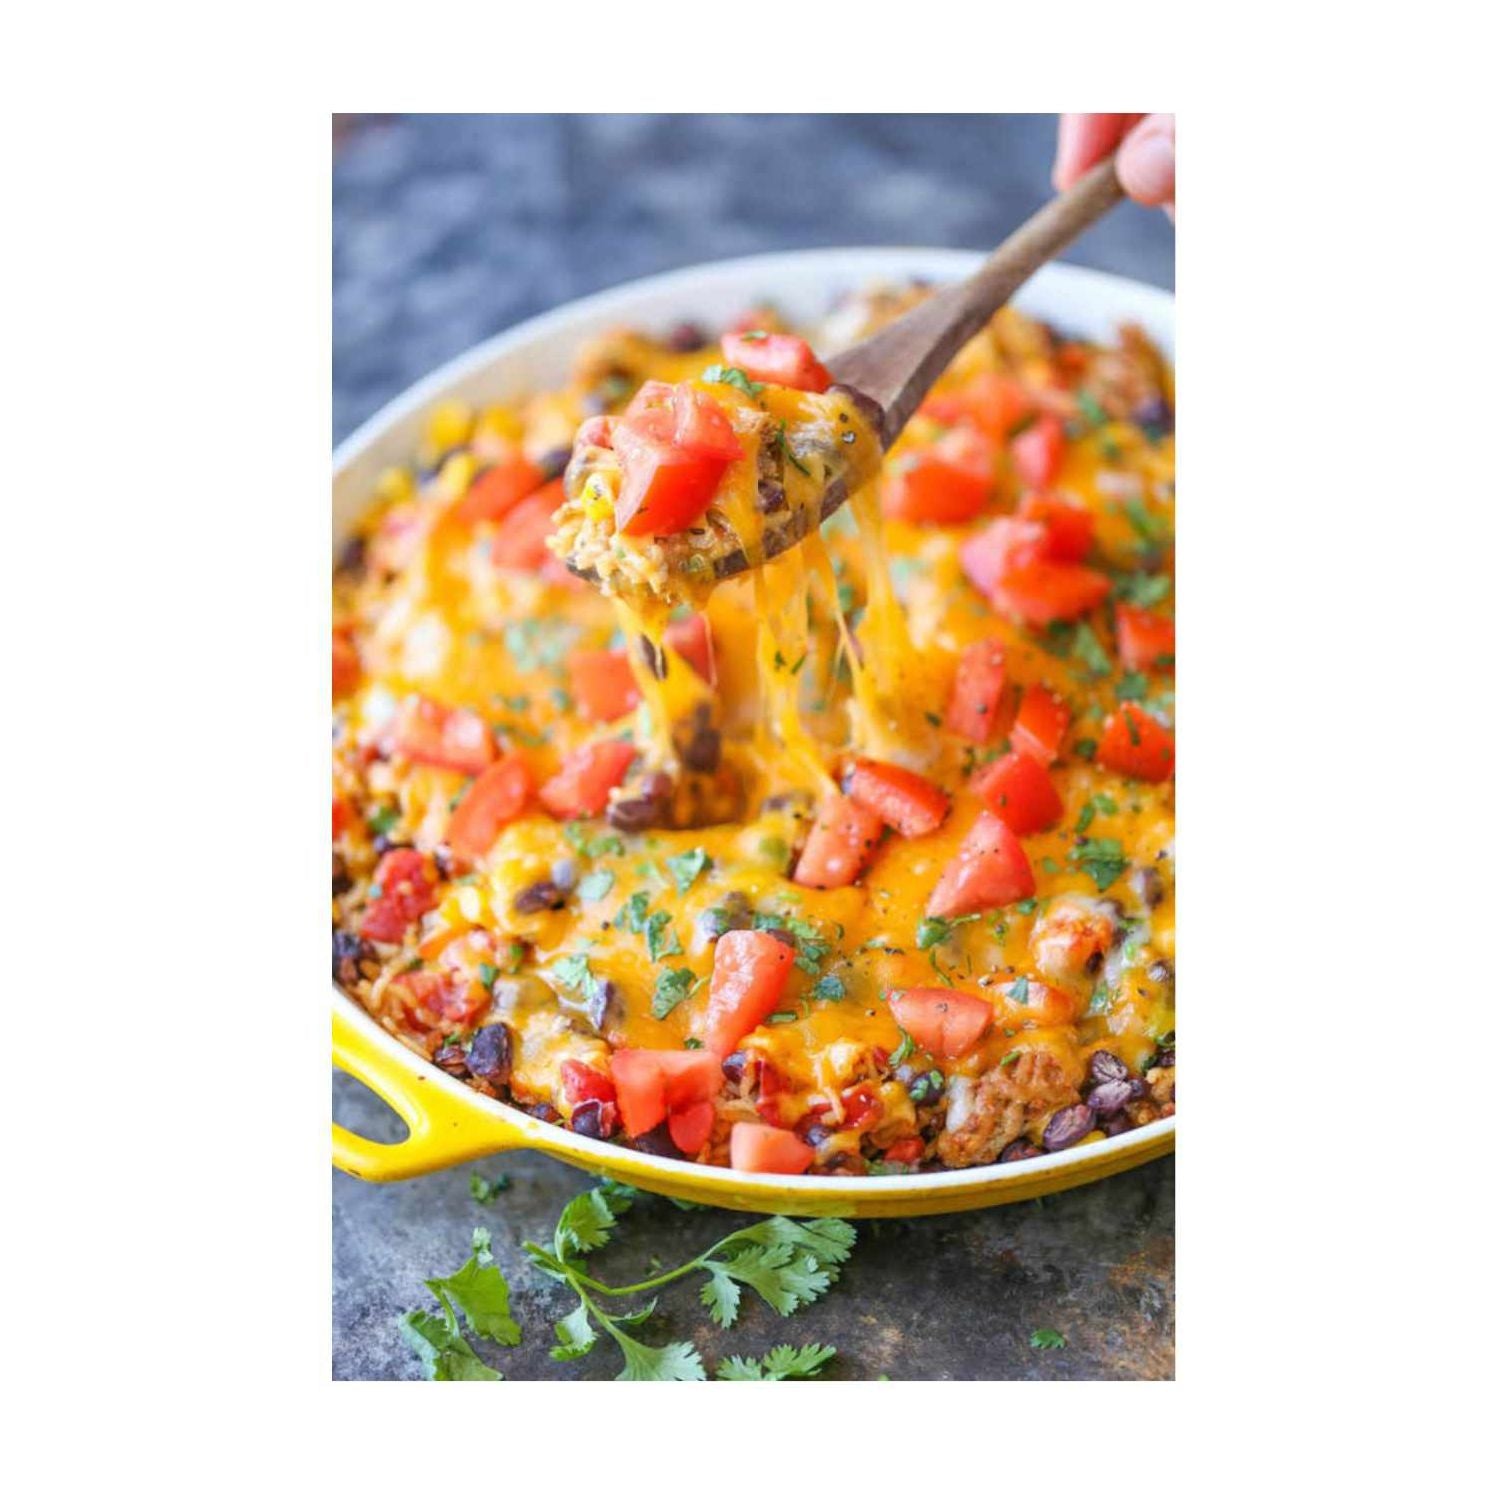 Cheesy Mexican Skillet Dish with rice included - Kitcheneez Mixes & More!